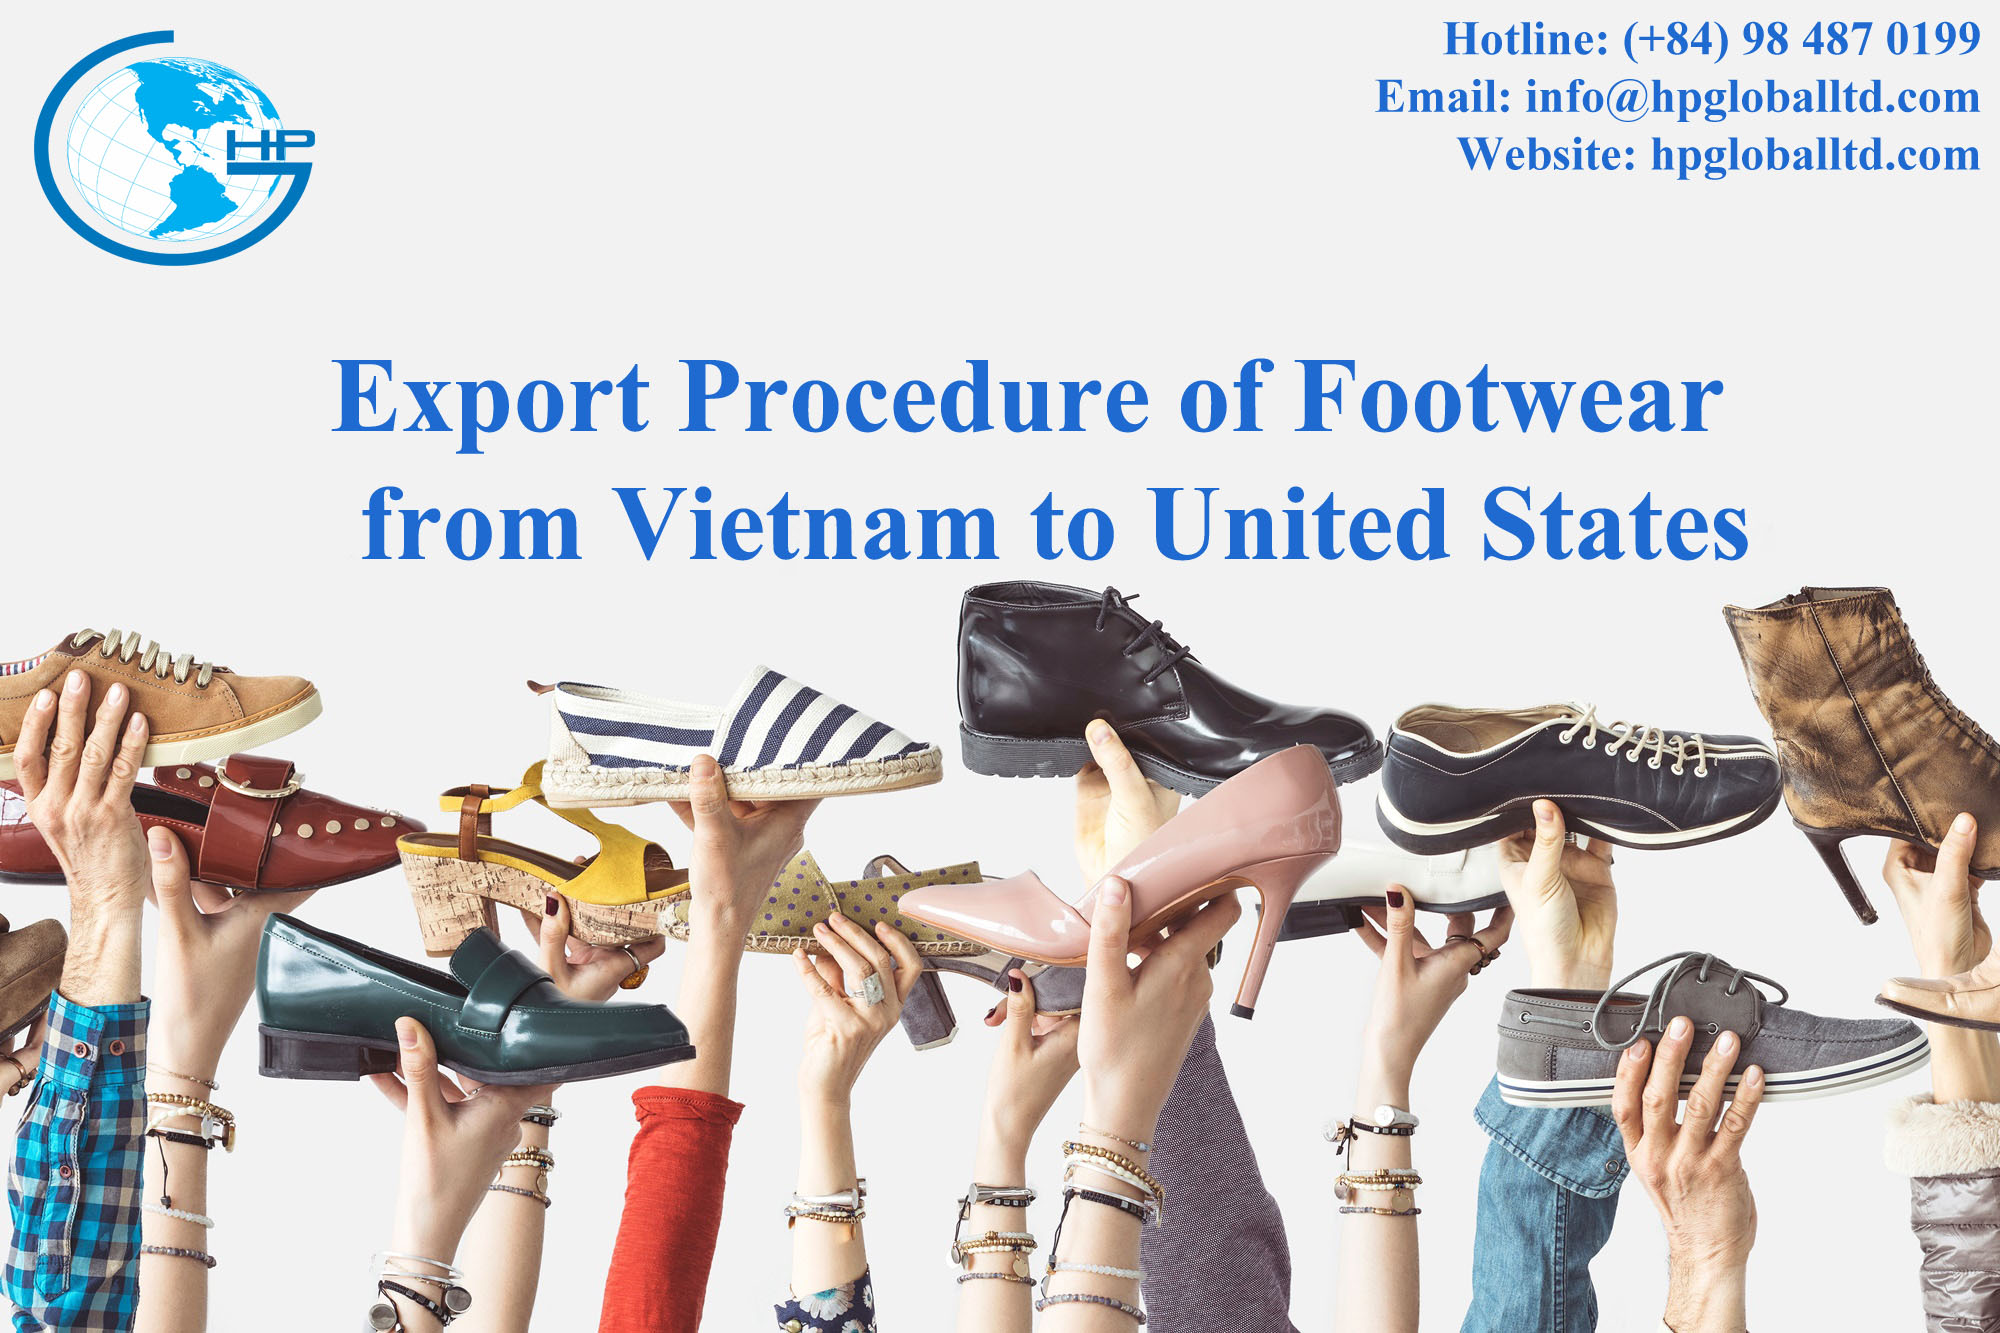 Export-Procedure-of-Footwear-from-Vietnam-to-United-States